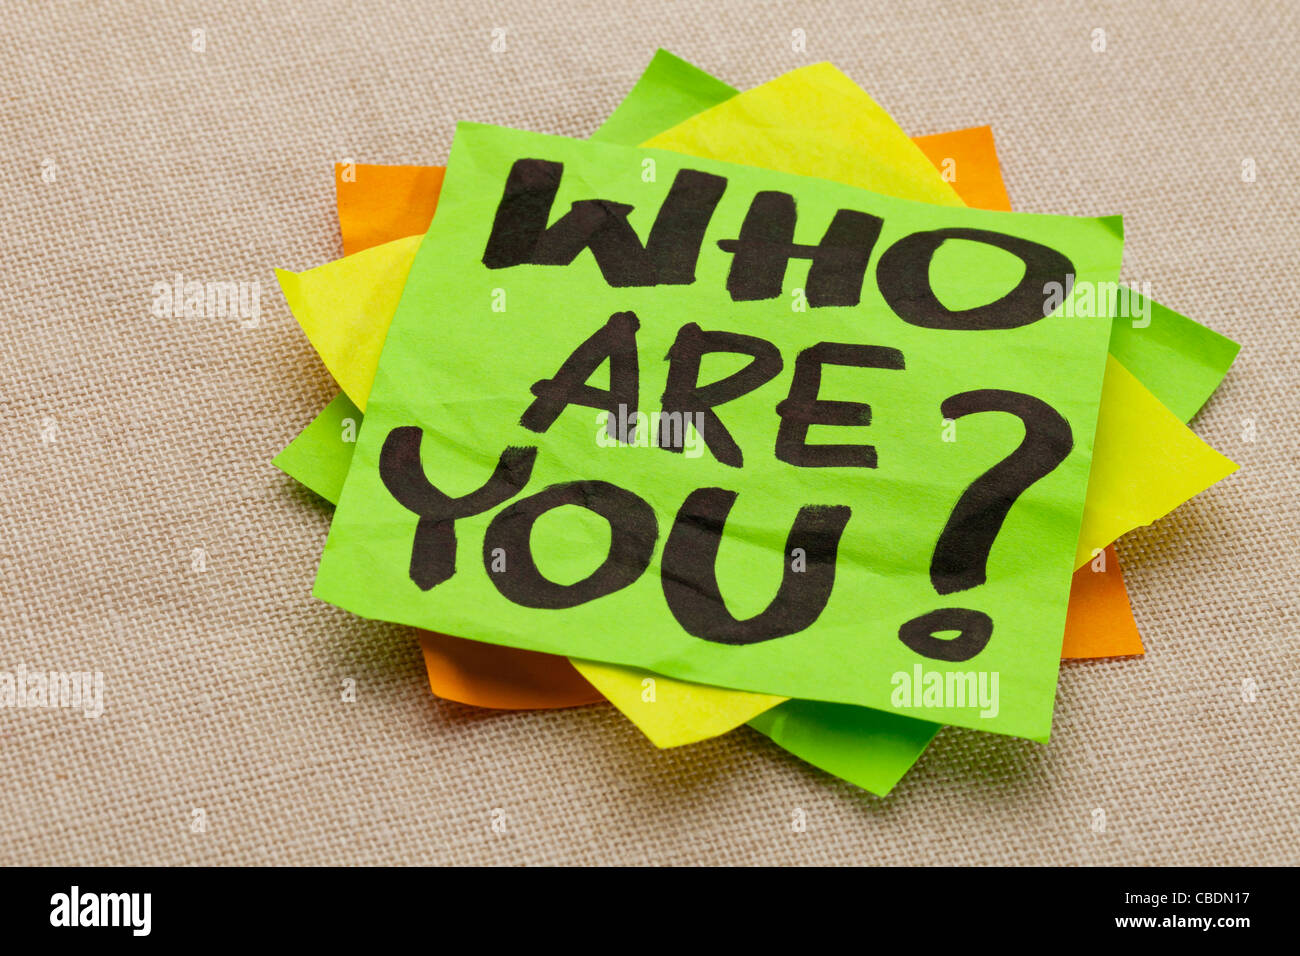 Who are you question - handwriting on a green sticky note Stock Photo